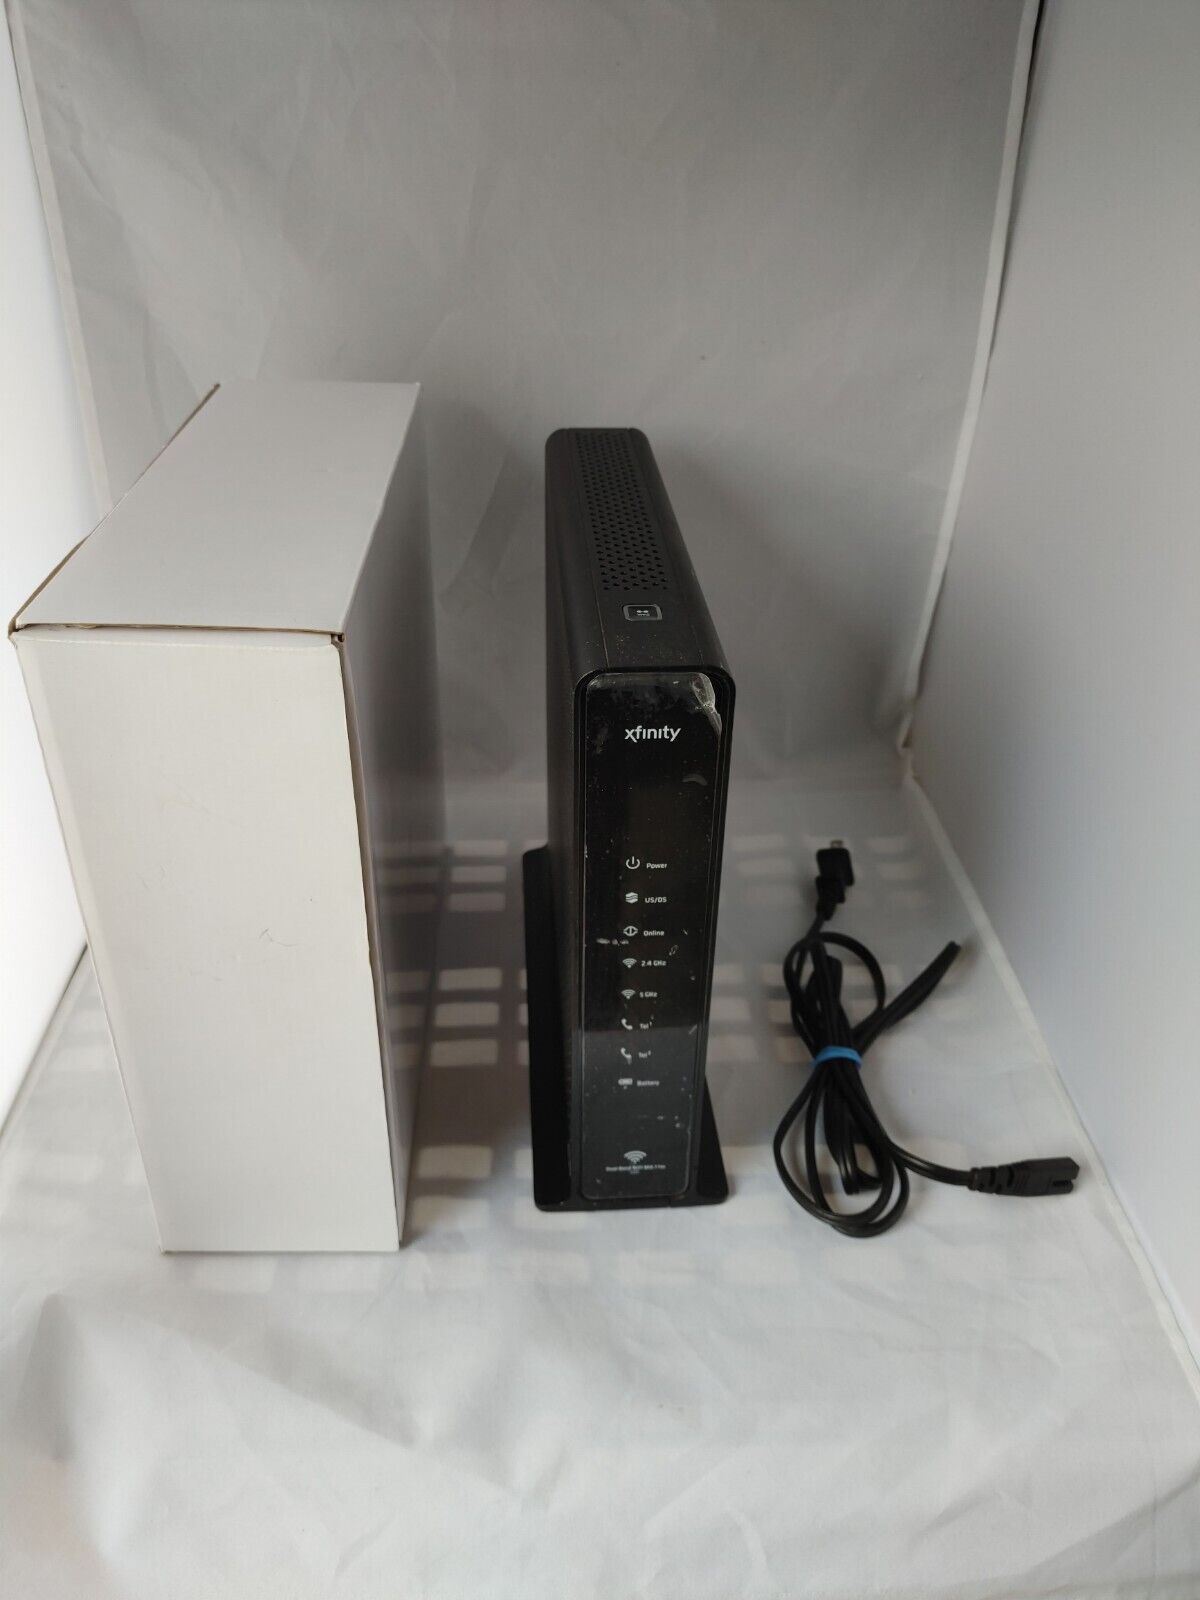 Arris TG1682G Dual Band Wireless 802.11ac Cable Modem Router, Power Cord.